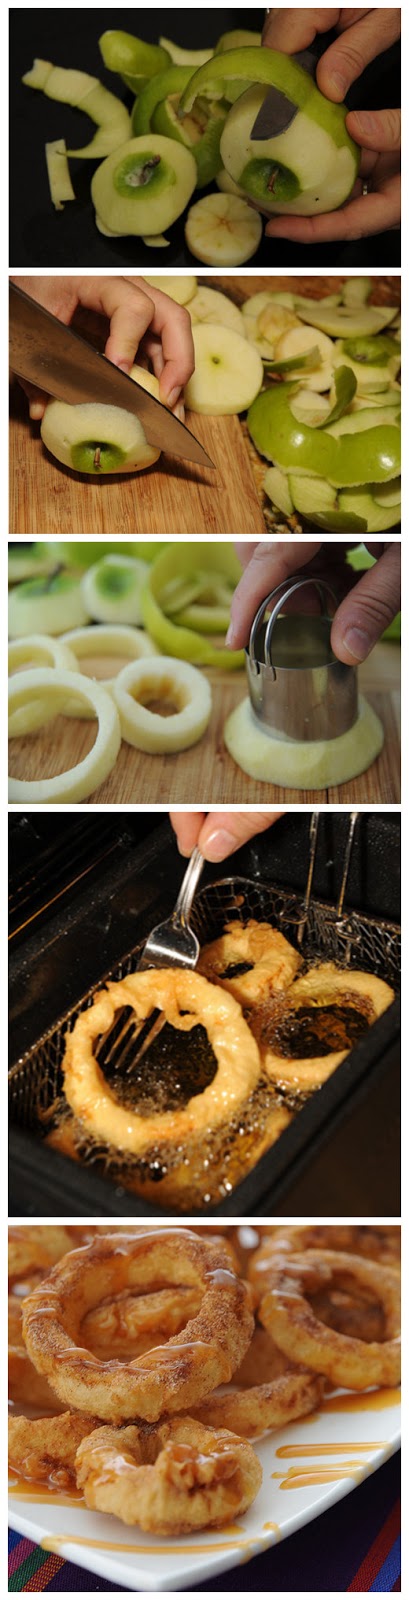 Apple Rings with Cinnamon Cream Syrup for Dipping